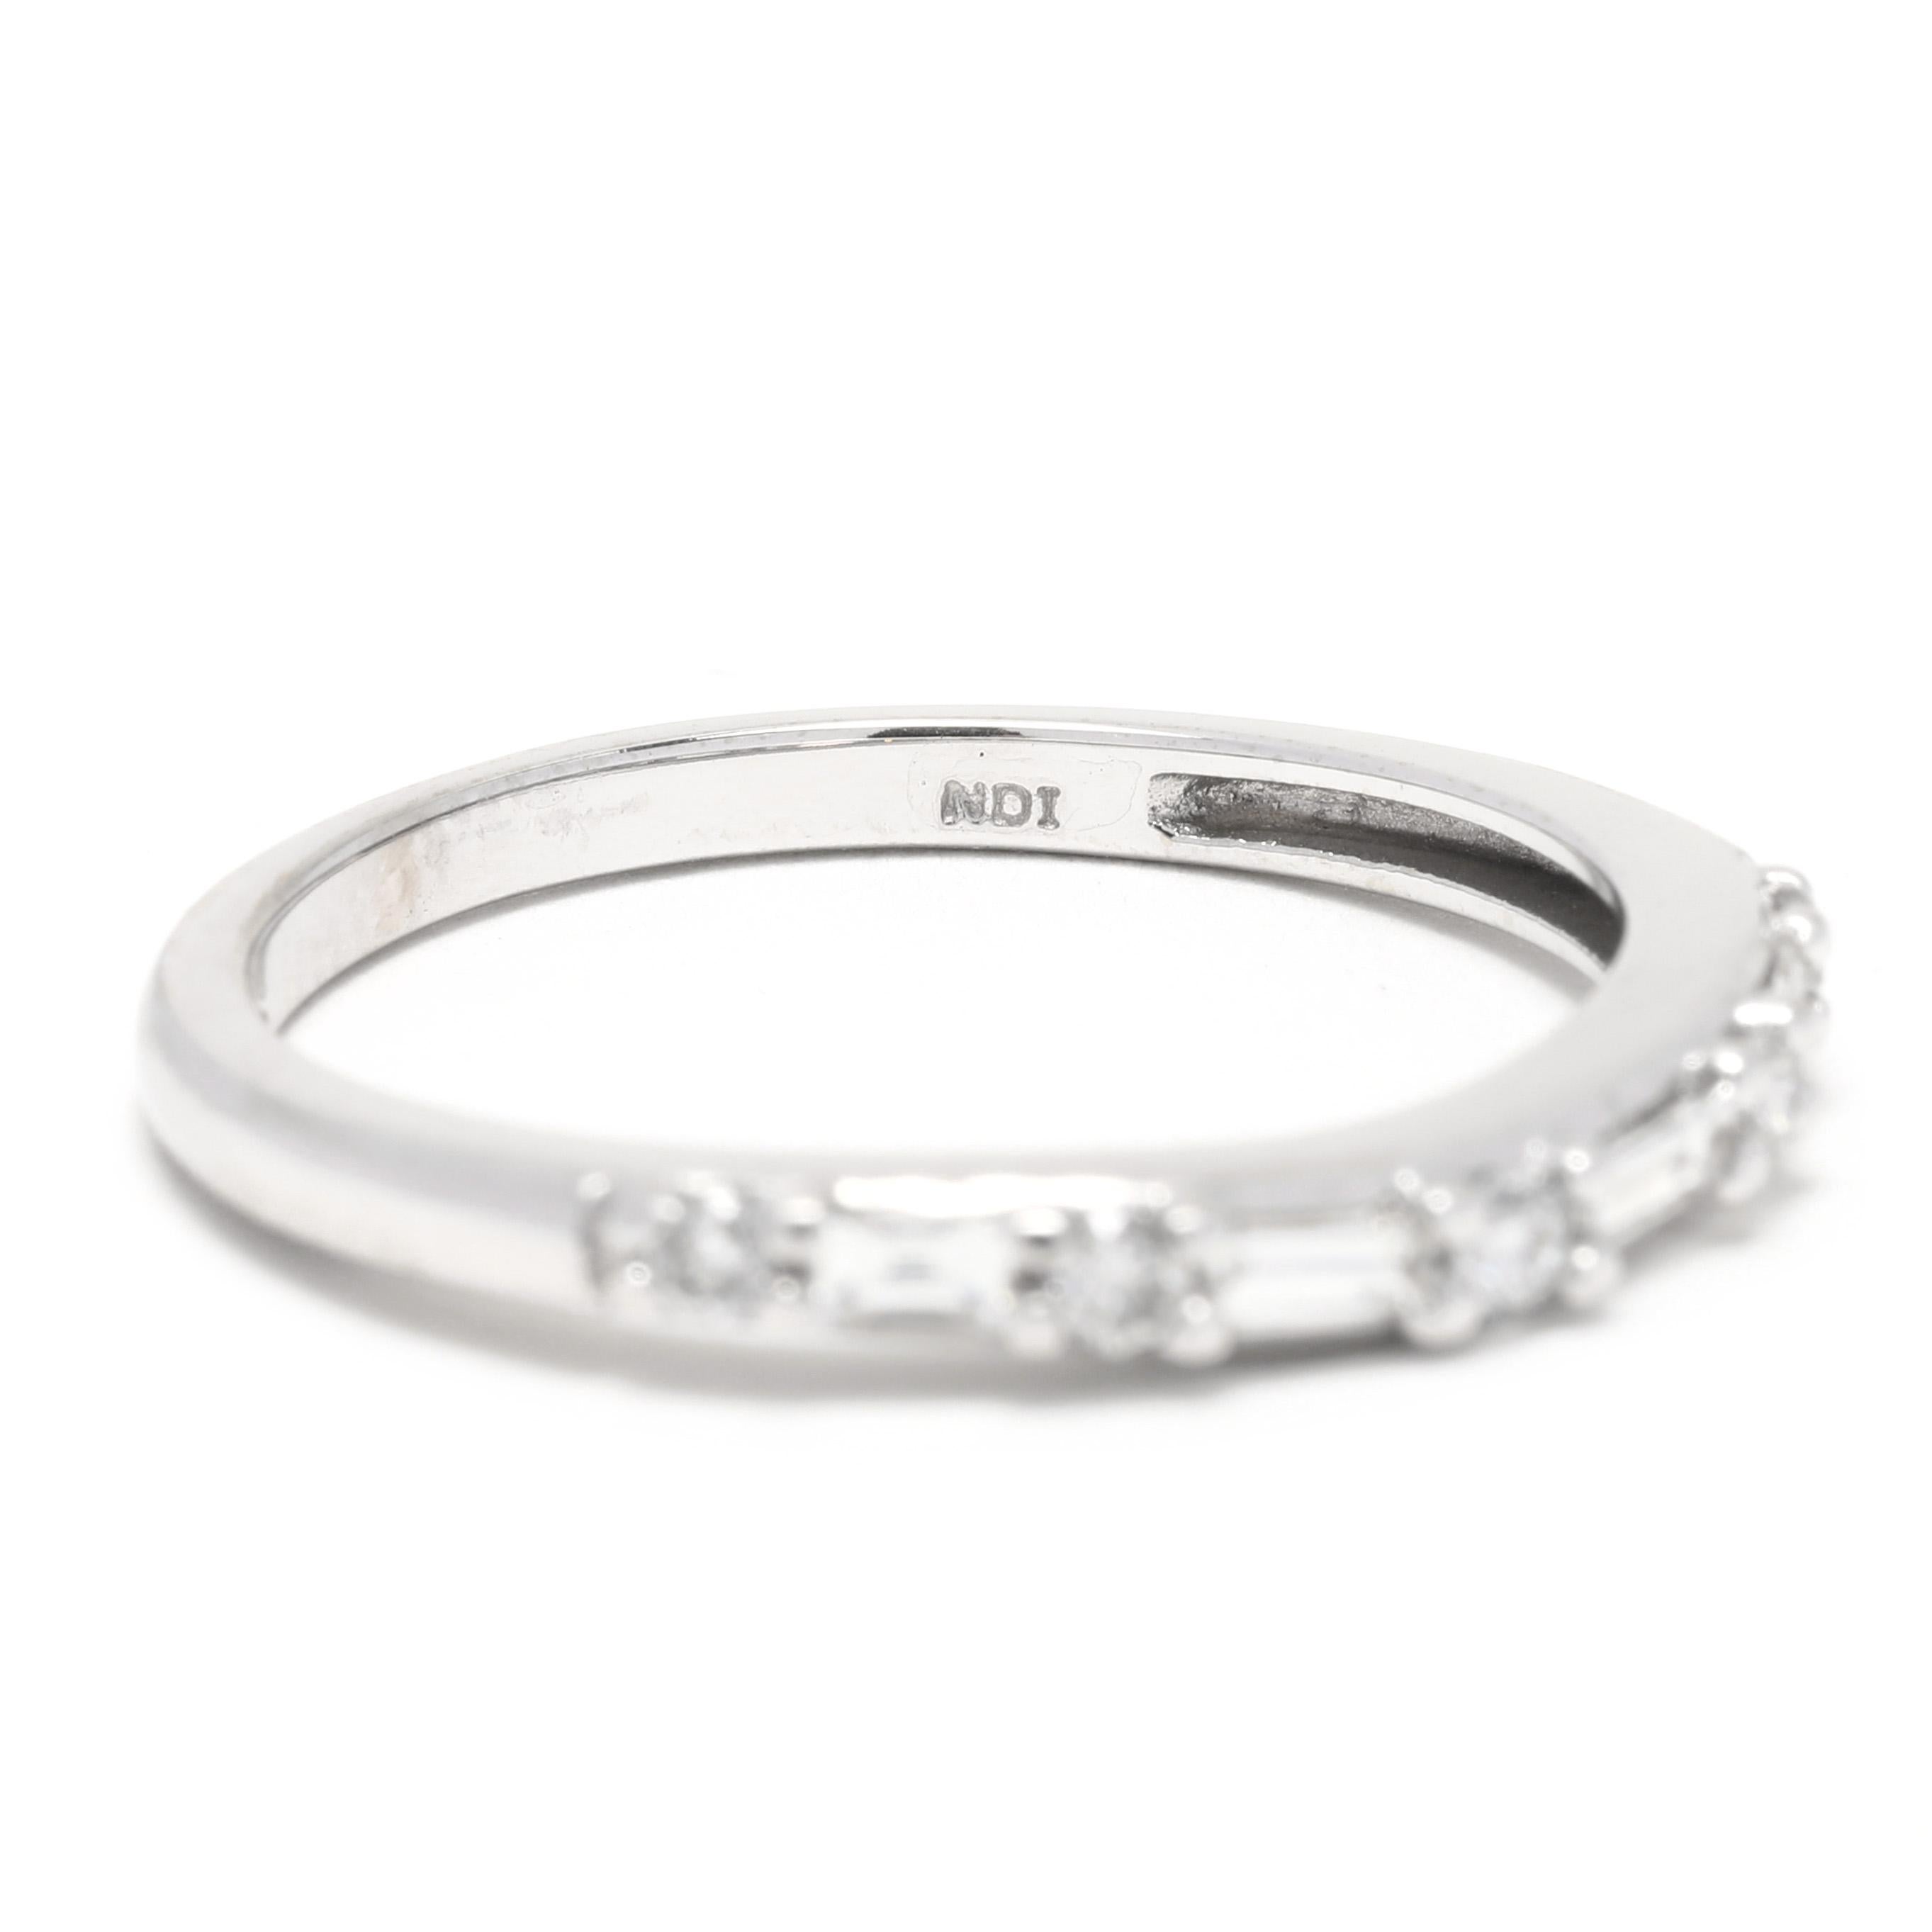 Round Baguette Curved Diamond Wedding Band, 14K White Gold, Ring Size 7 1